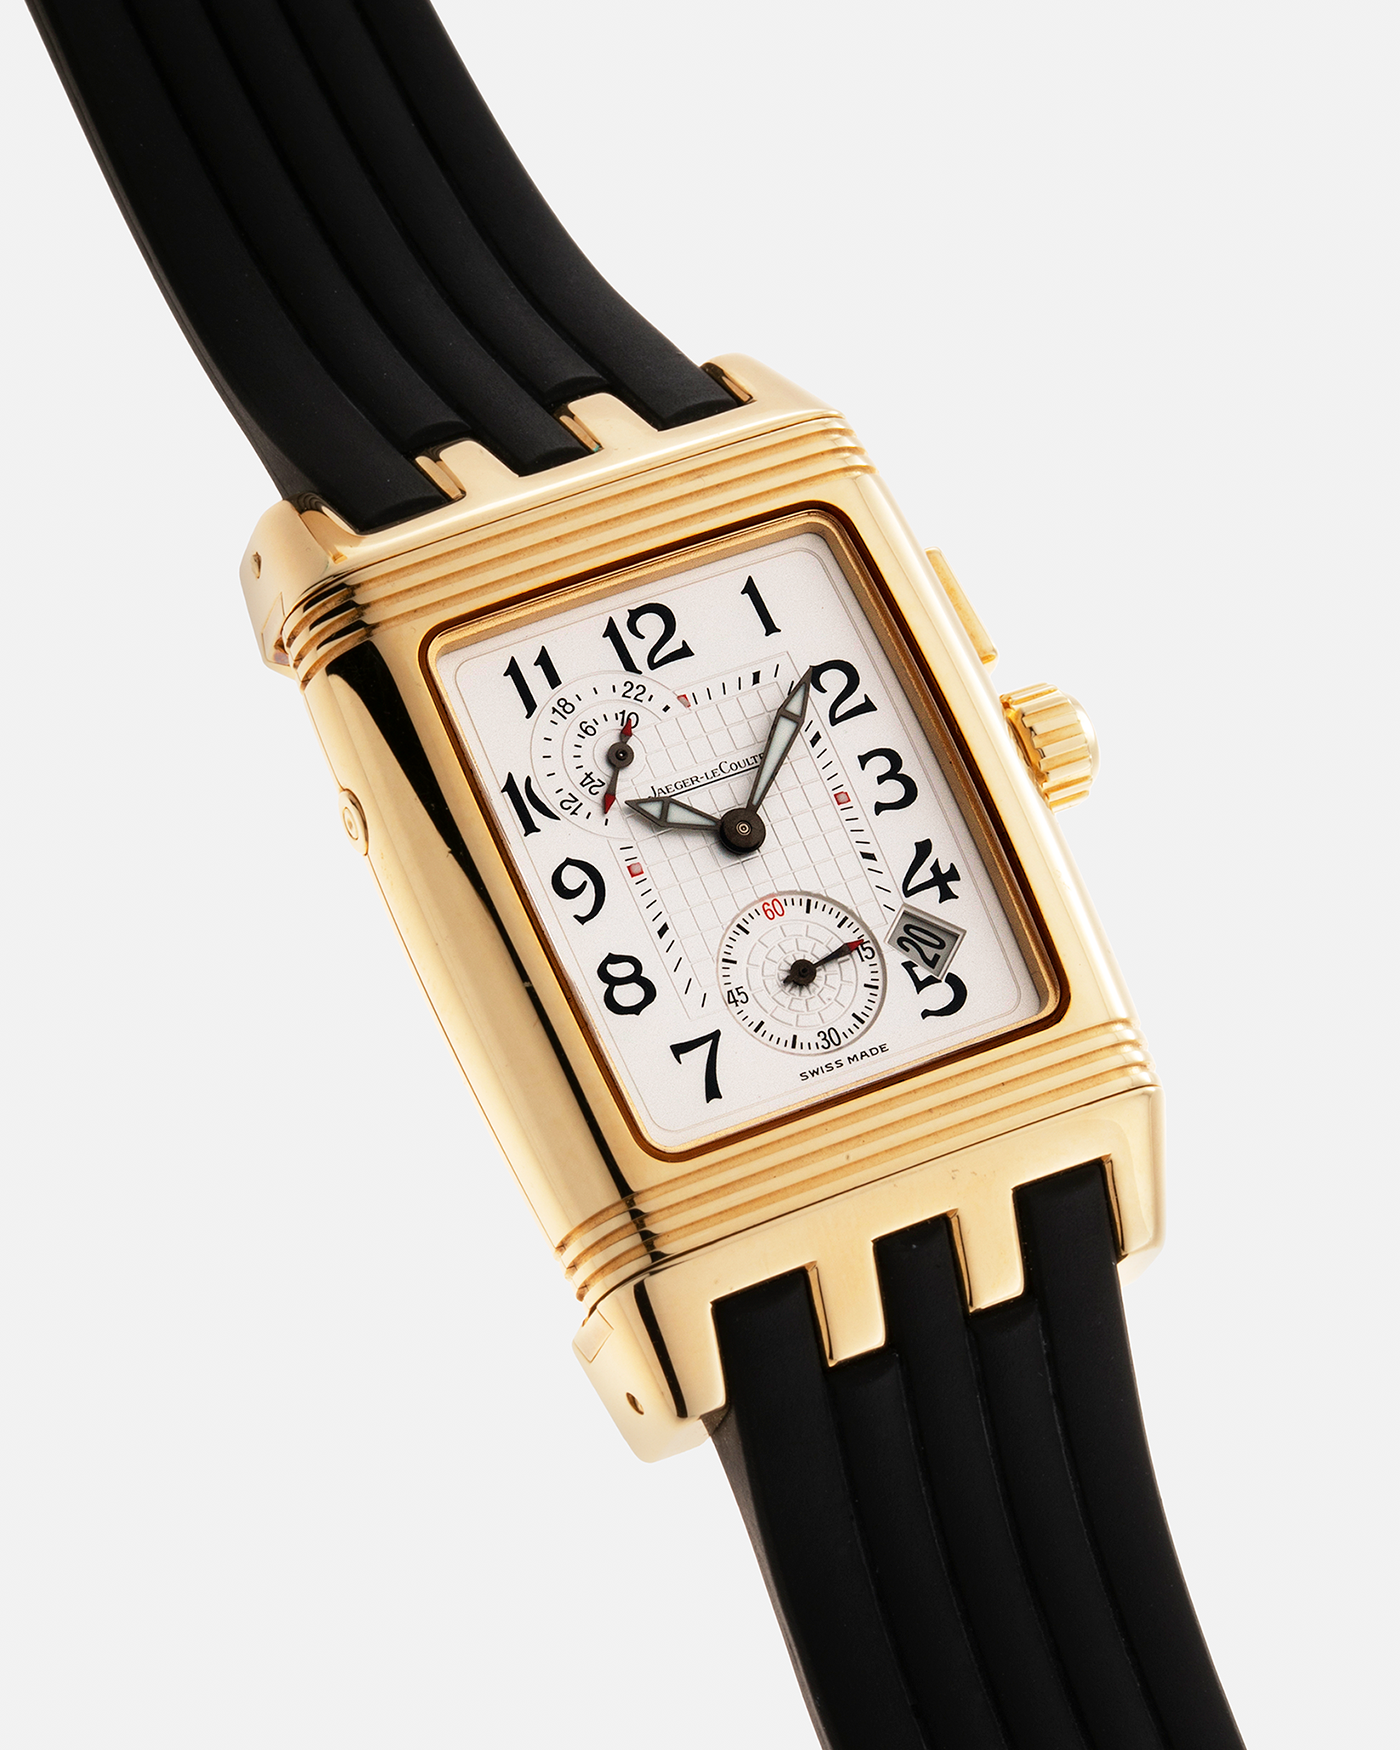 Brand: Jaeger LeCoultre Year: 2000’s Model: Reverso Night and Day Gran’ Sport Duo Model Number: Q2941601 Reference Number: 295.1.51 Material: 18-carat Yellow Gold Movement: JLC Cal. 851, Manual-Wind Case Diameter: 44mm x 38mm Strap: Jaeger LeCoultre Gran’ Sport Rubber Strap with Signed 18-carat Yellow Gold Deployant Clasp